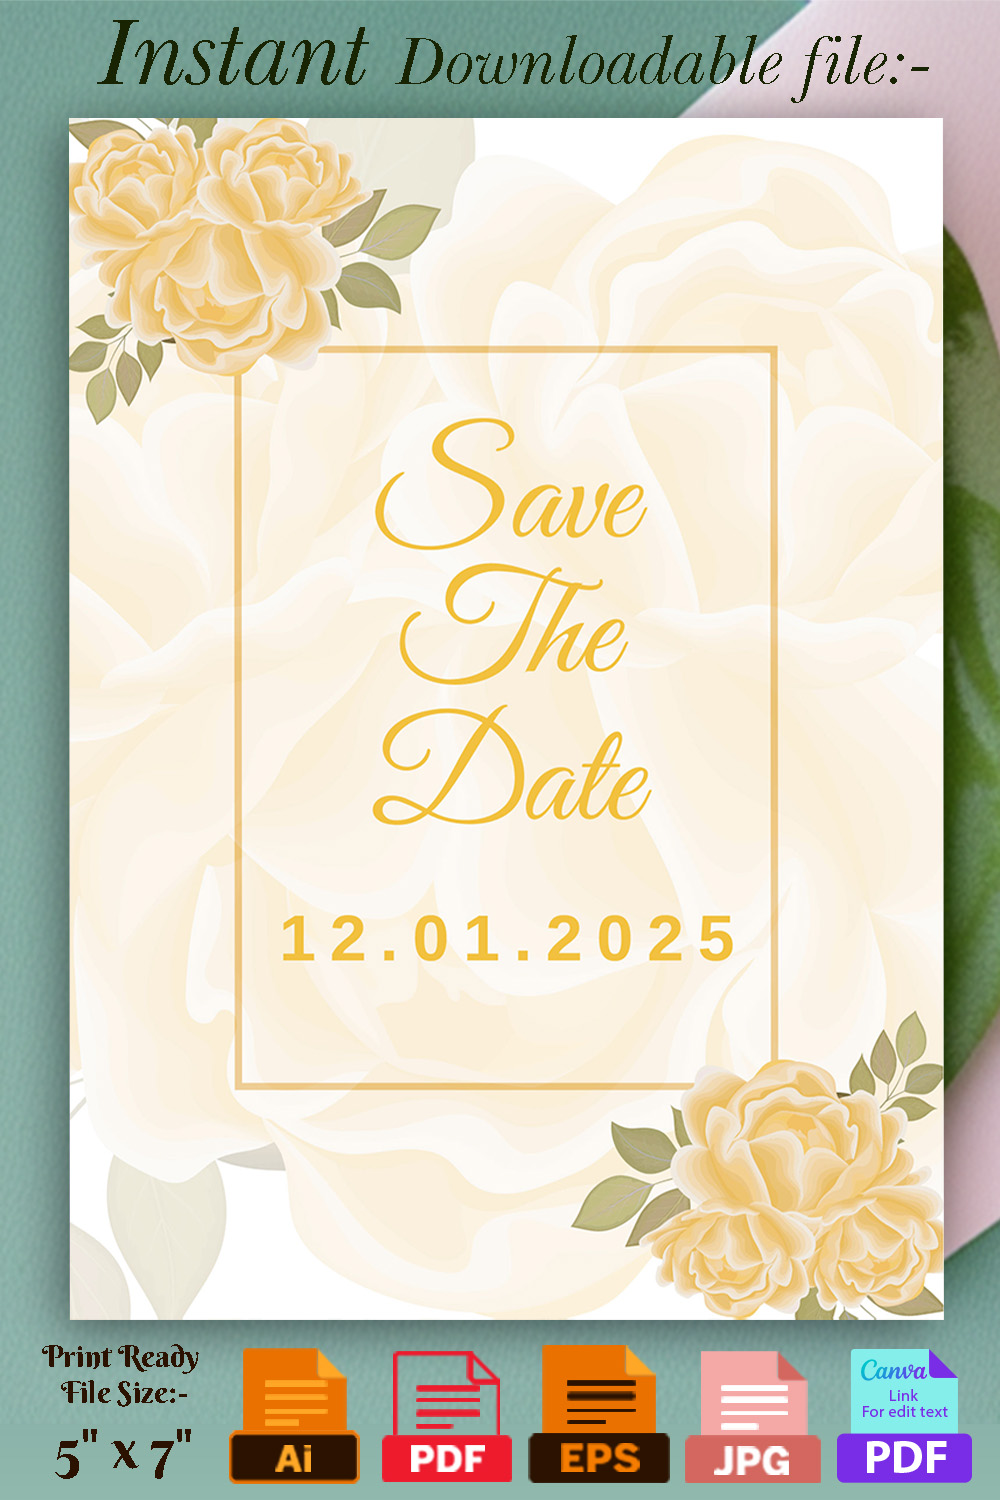 Image with exquisite wedding invitation card in yellow tones and flowers.